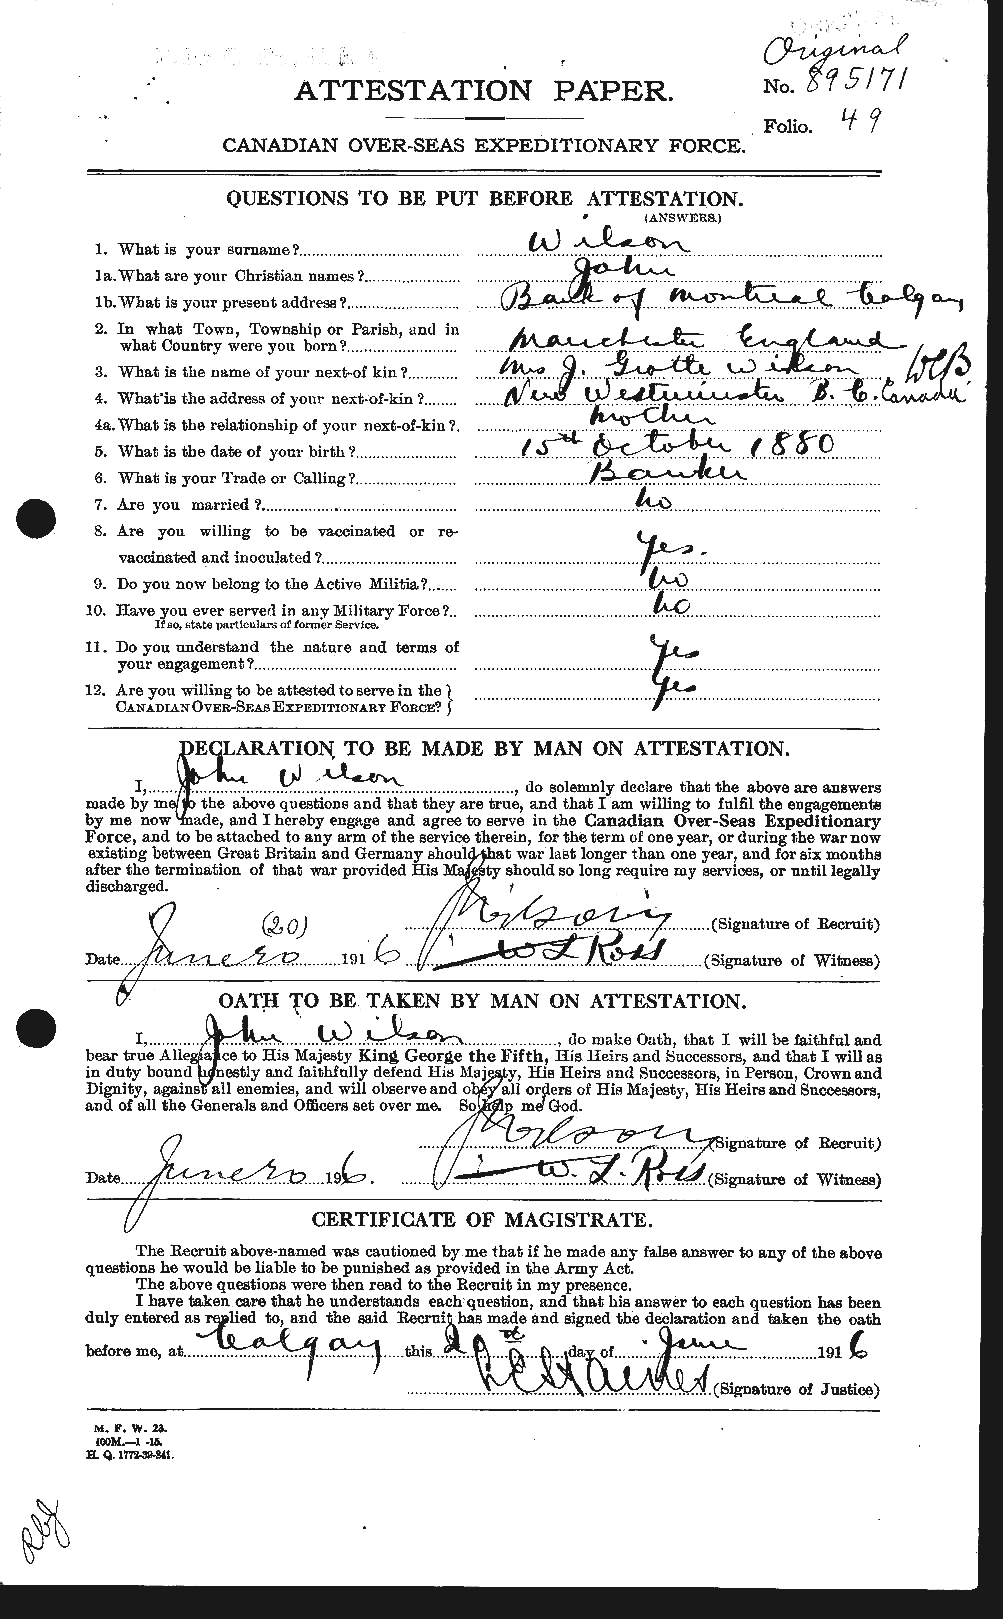 Personnel Records of the First World War - CEF 681606a